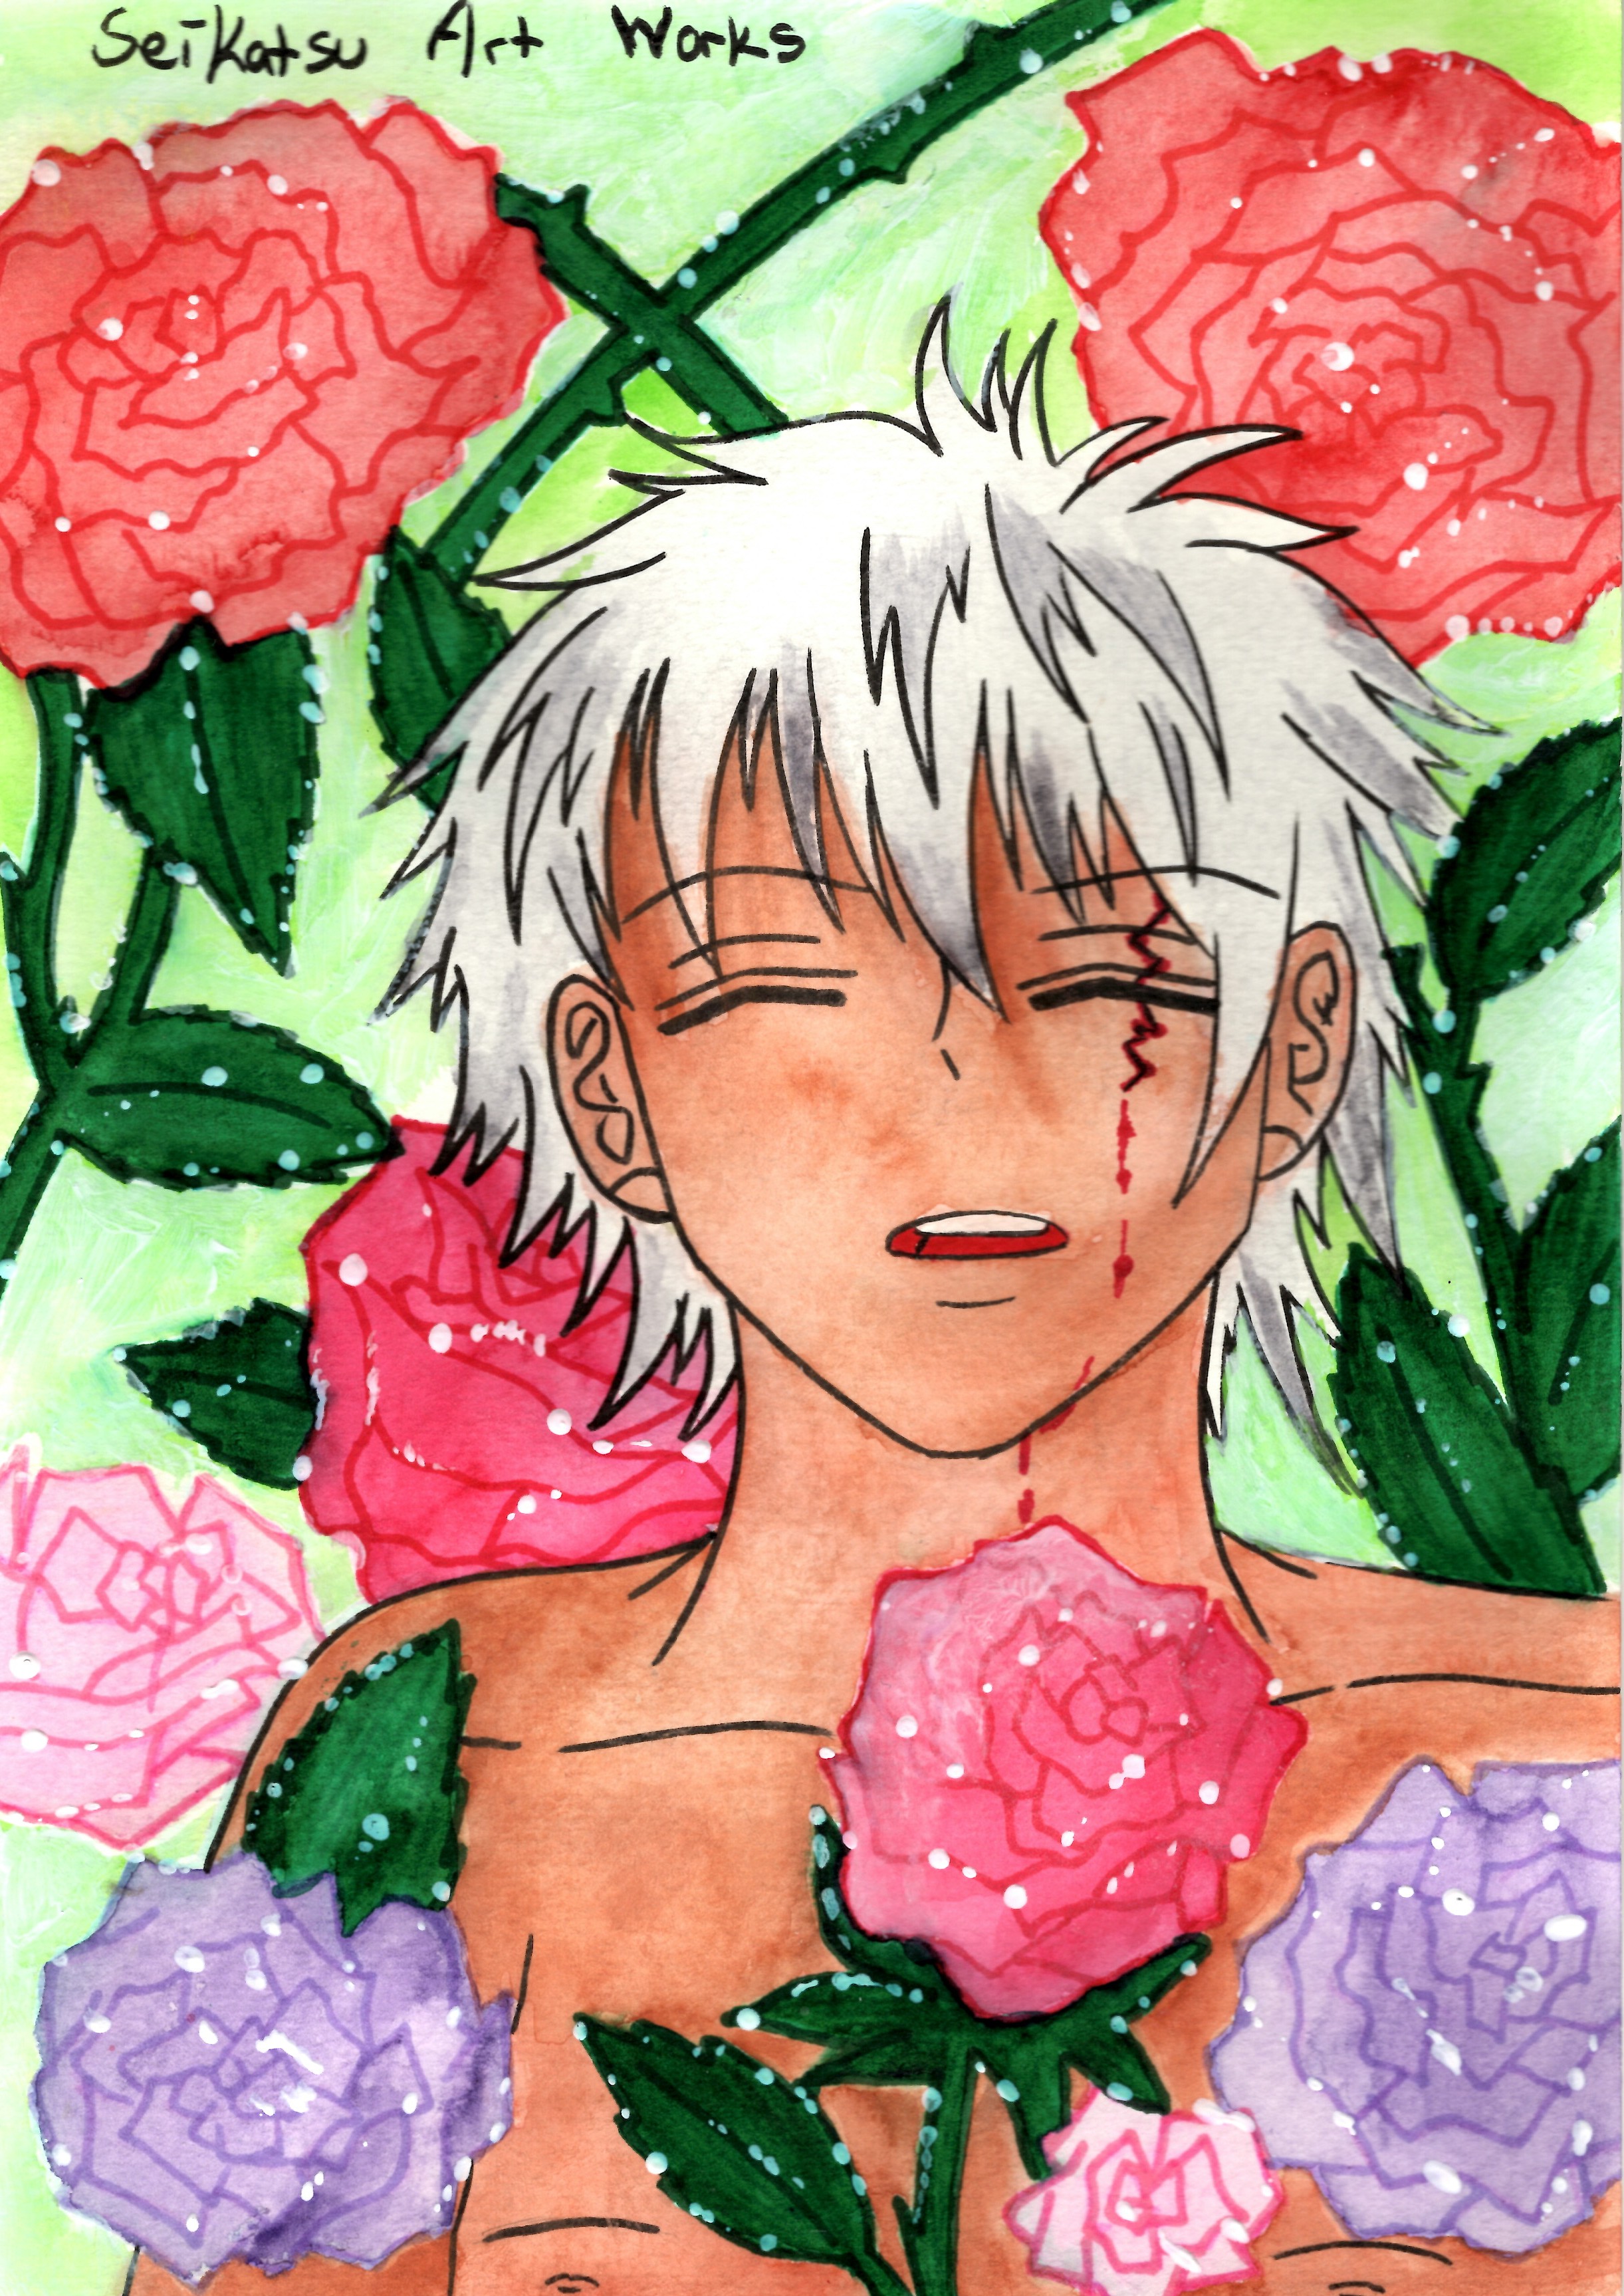 Yusei with Roses and his Scar